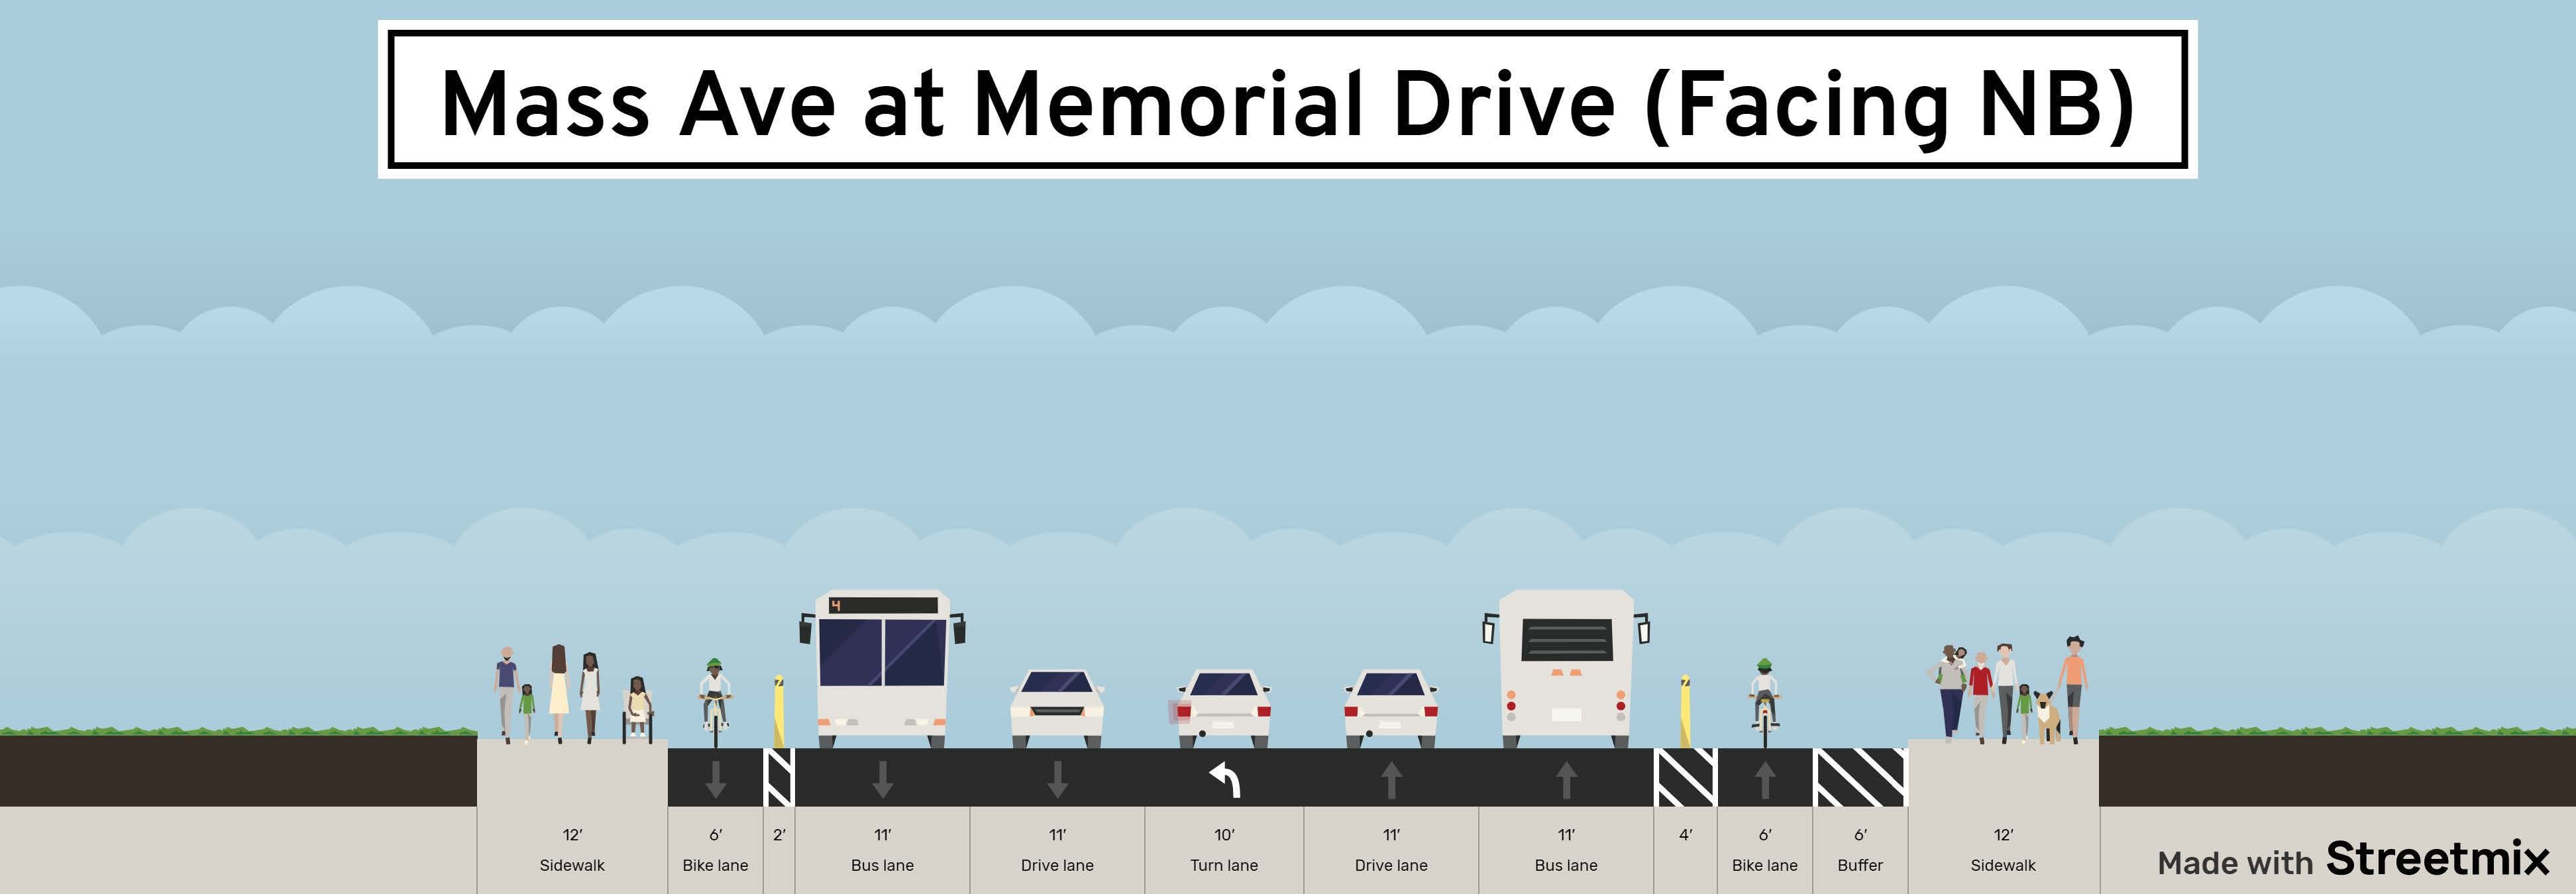 Proposed cross section of Massachusetts Avenue and Memorial Drive